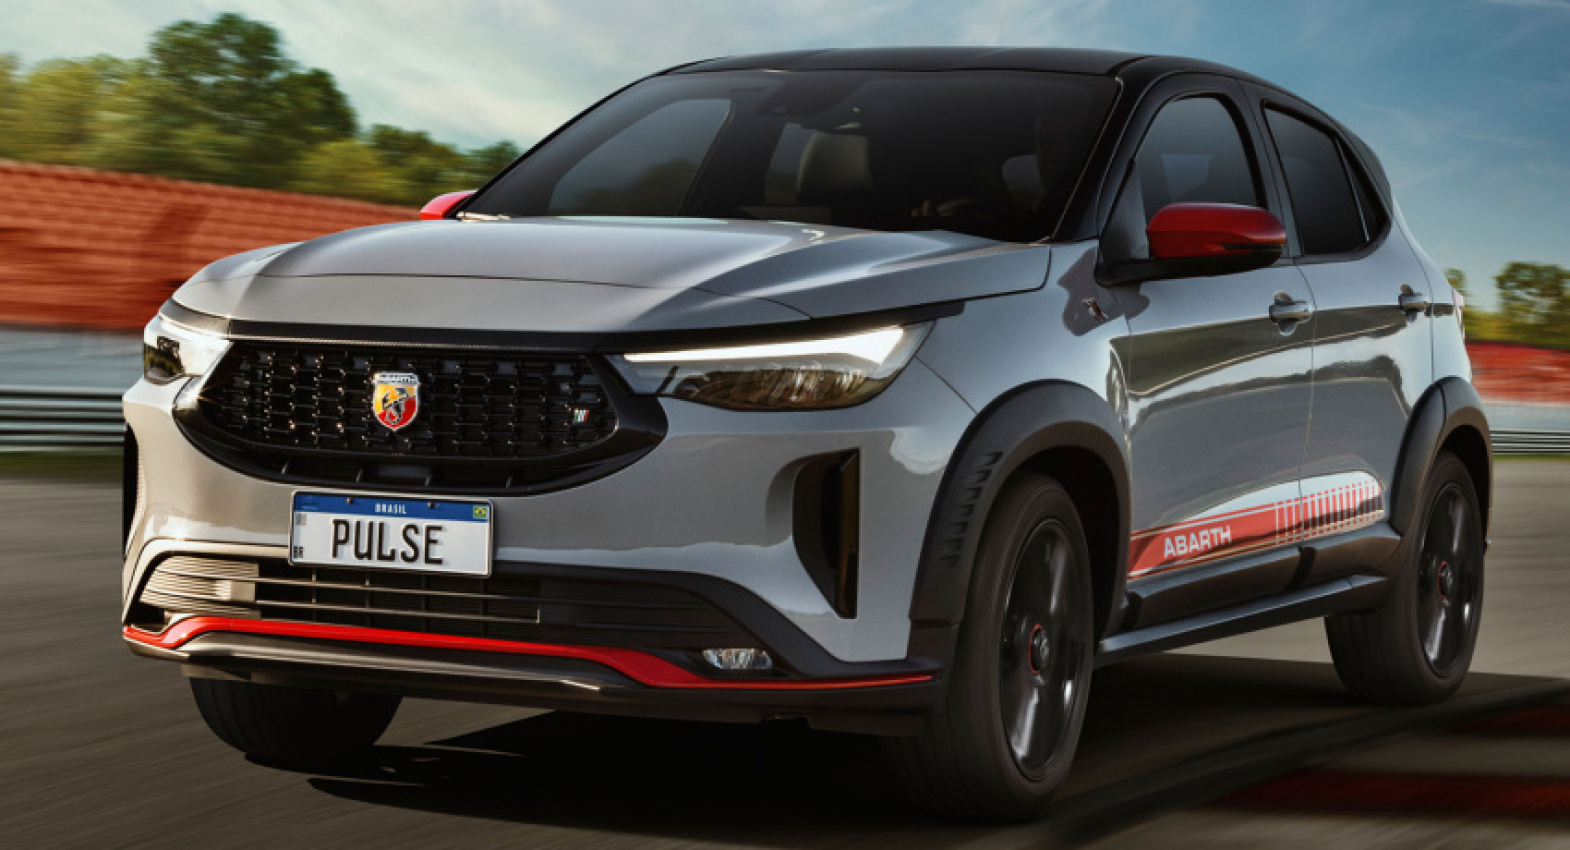 autos, bmw, cars, fiat, mercedes-benz, mg, news, bmw m3, daily brief, mercedes, 2023 mercedes-amg gt 63 4-door, brazil’s fiat pulse abarth, and bmw m3 touring’s latest teaser: your morning brief